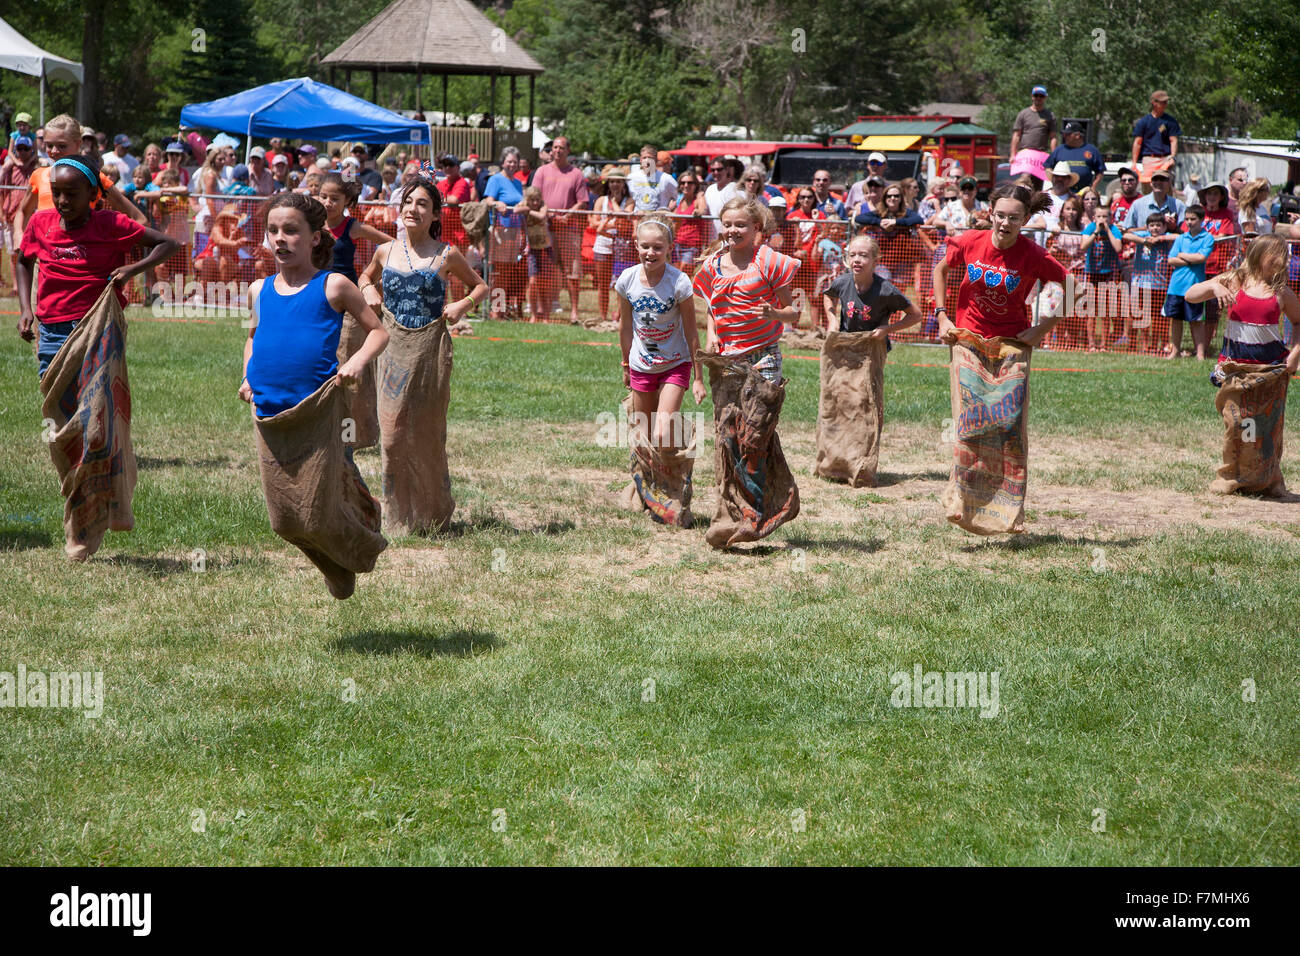 Young girls compete in Three Legged race in Ouray, Colorado, July 4, Indpendence Day annual picnic event Stock Photo